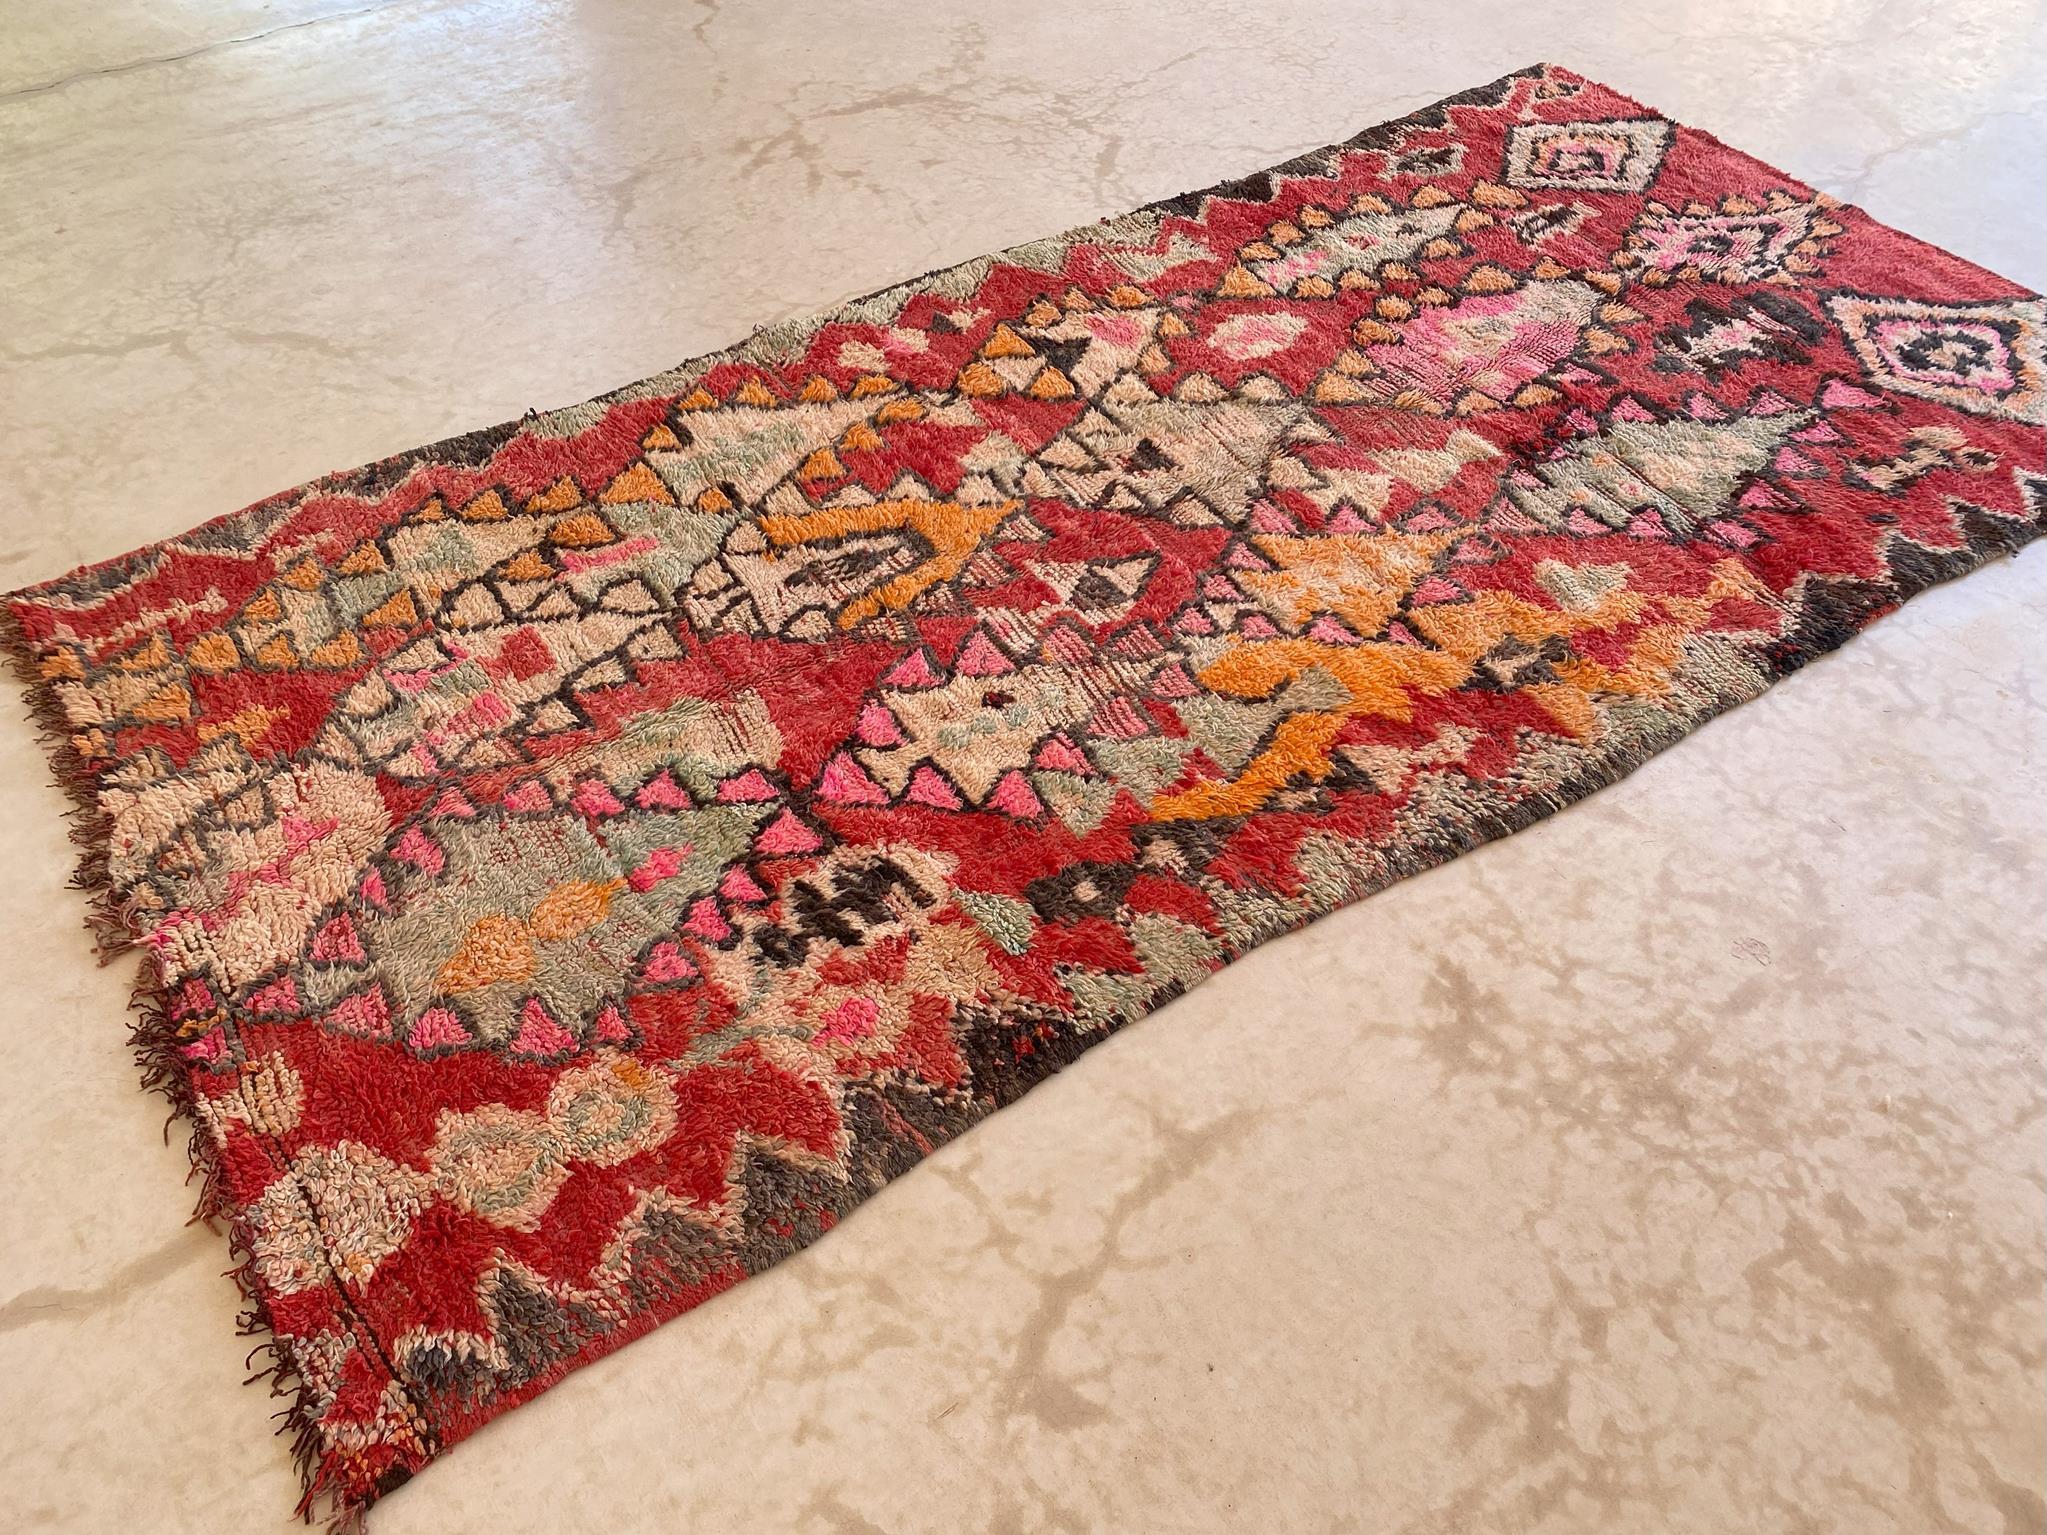 Vintage Moroccan Rehamna rug - Red/pink - 5.9x12.2feet / 180x373cm In Good Condition For Sale In Marrakech, MA